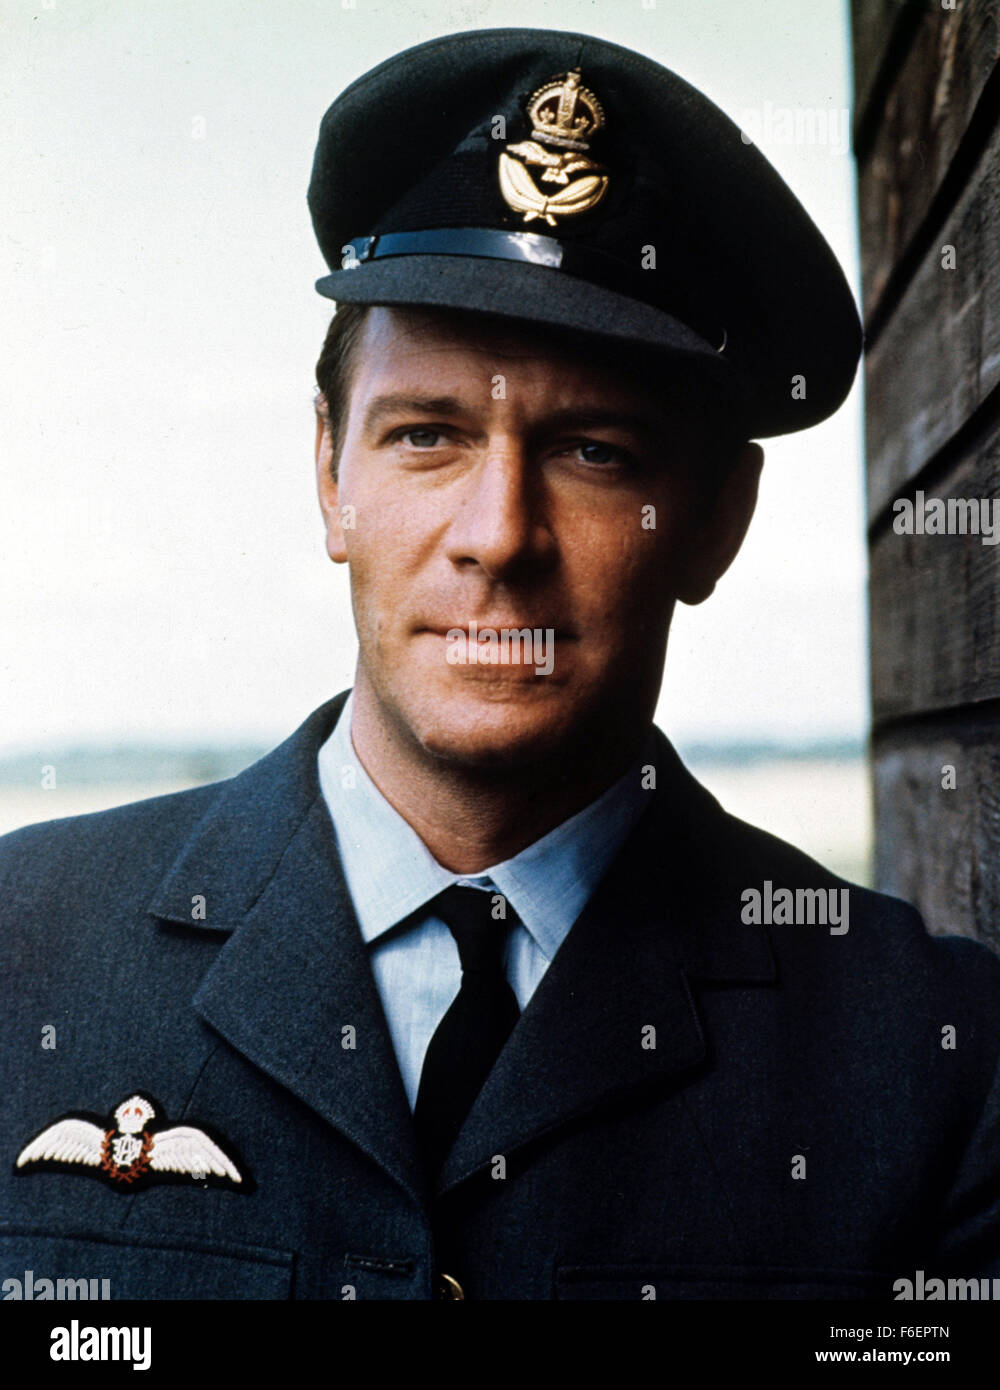 Sep 15, 1969; Middlesex, England, UK; LAURENCE OLIVIER as Air Chief Marshal Sir Hugh Dowding in the war, action, drama film ''Battle of Britain'' directed by Guy Hamilton. Stock Photo